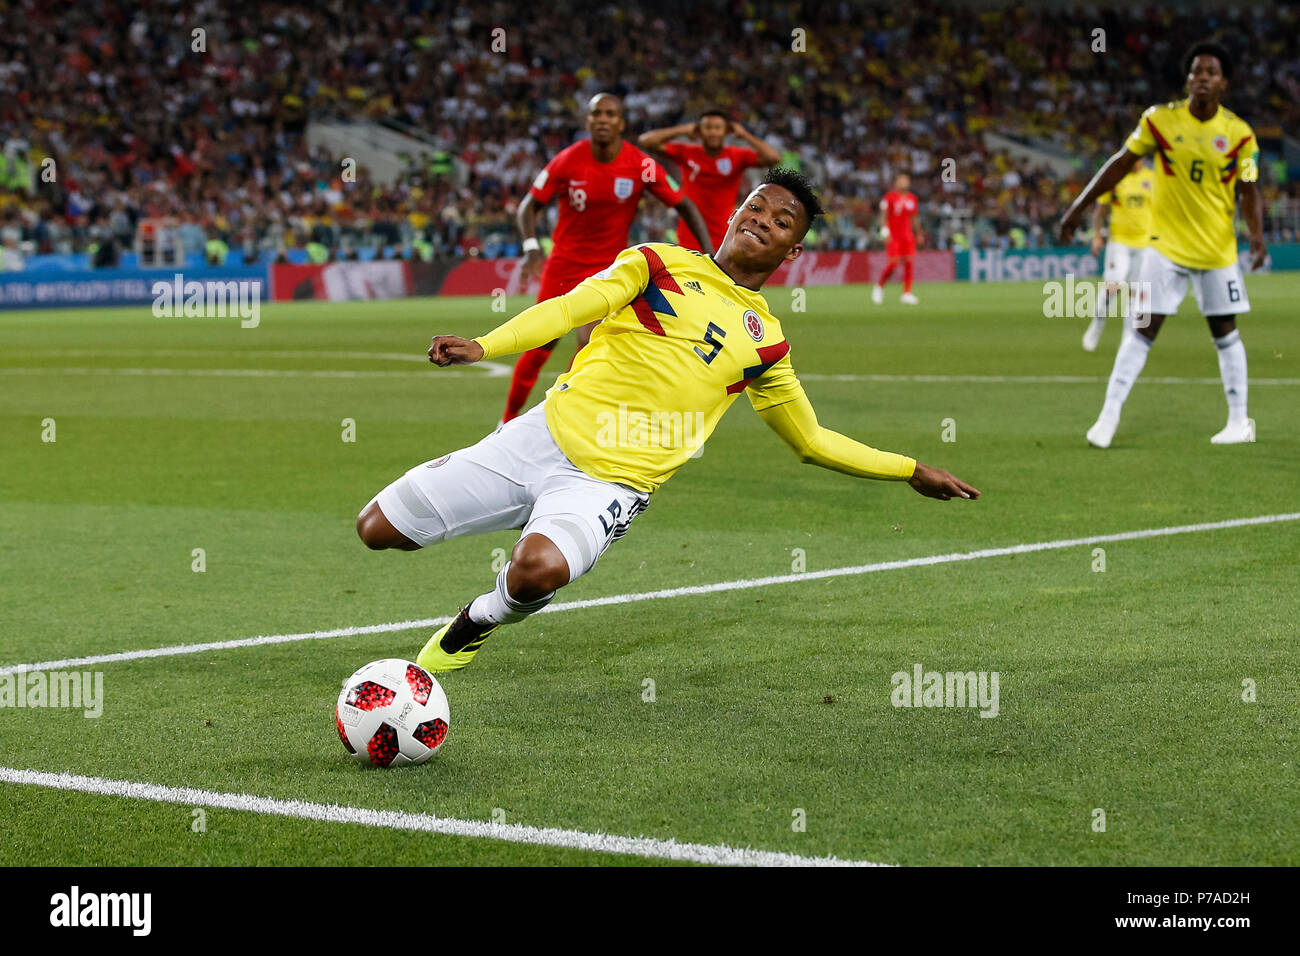 Moscow, Russia. 3rd July, 2018. Wilmar Barrios of Colombia during the 2018 FIFA World Cup Round of 16 match between Colombia and England at Spartak Stadium on July 3rd 2018 in Moscow, Russia. (Photo by Daniel Chesterton/phcimages.com) Credit: PHC Images/Alamy Live News Stock Photo